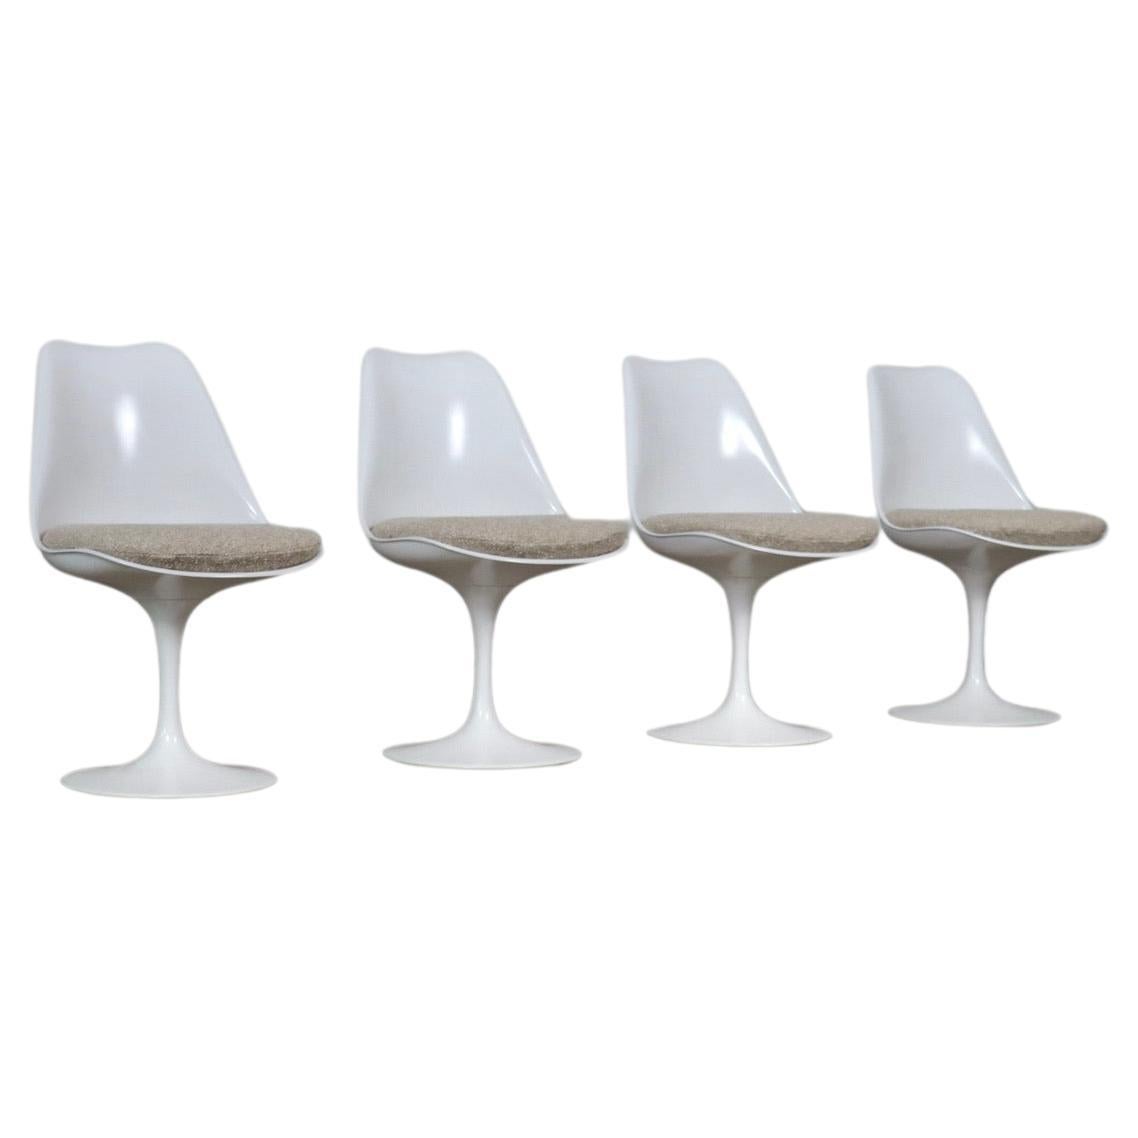 Set Of 4 Vintage Tulip Dining Chairs By Eero Saarinen For Knoll, 1960s